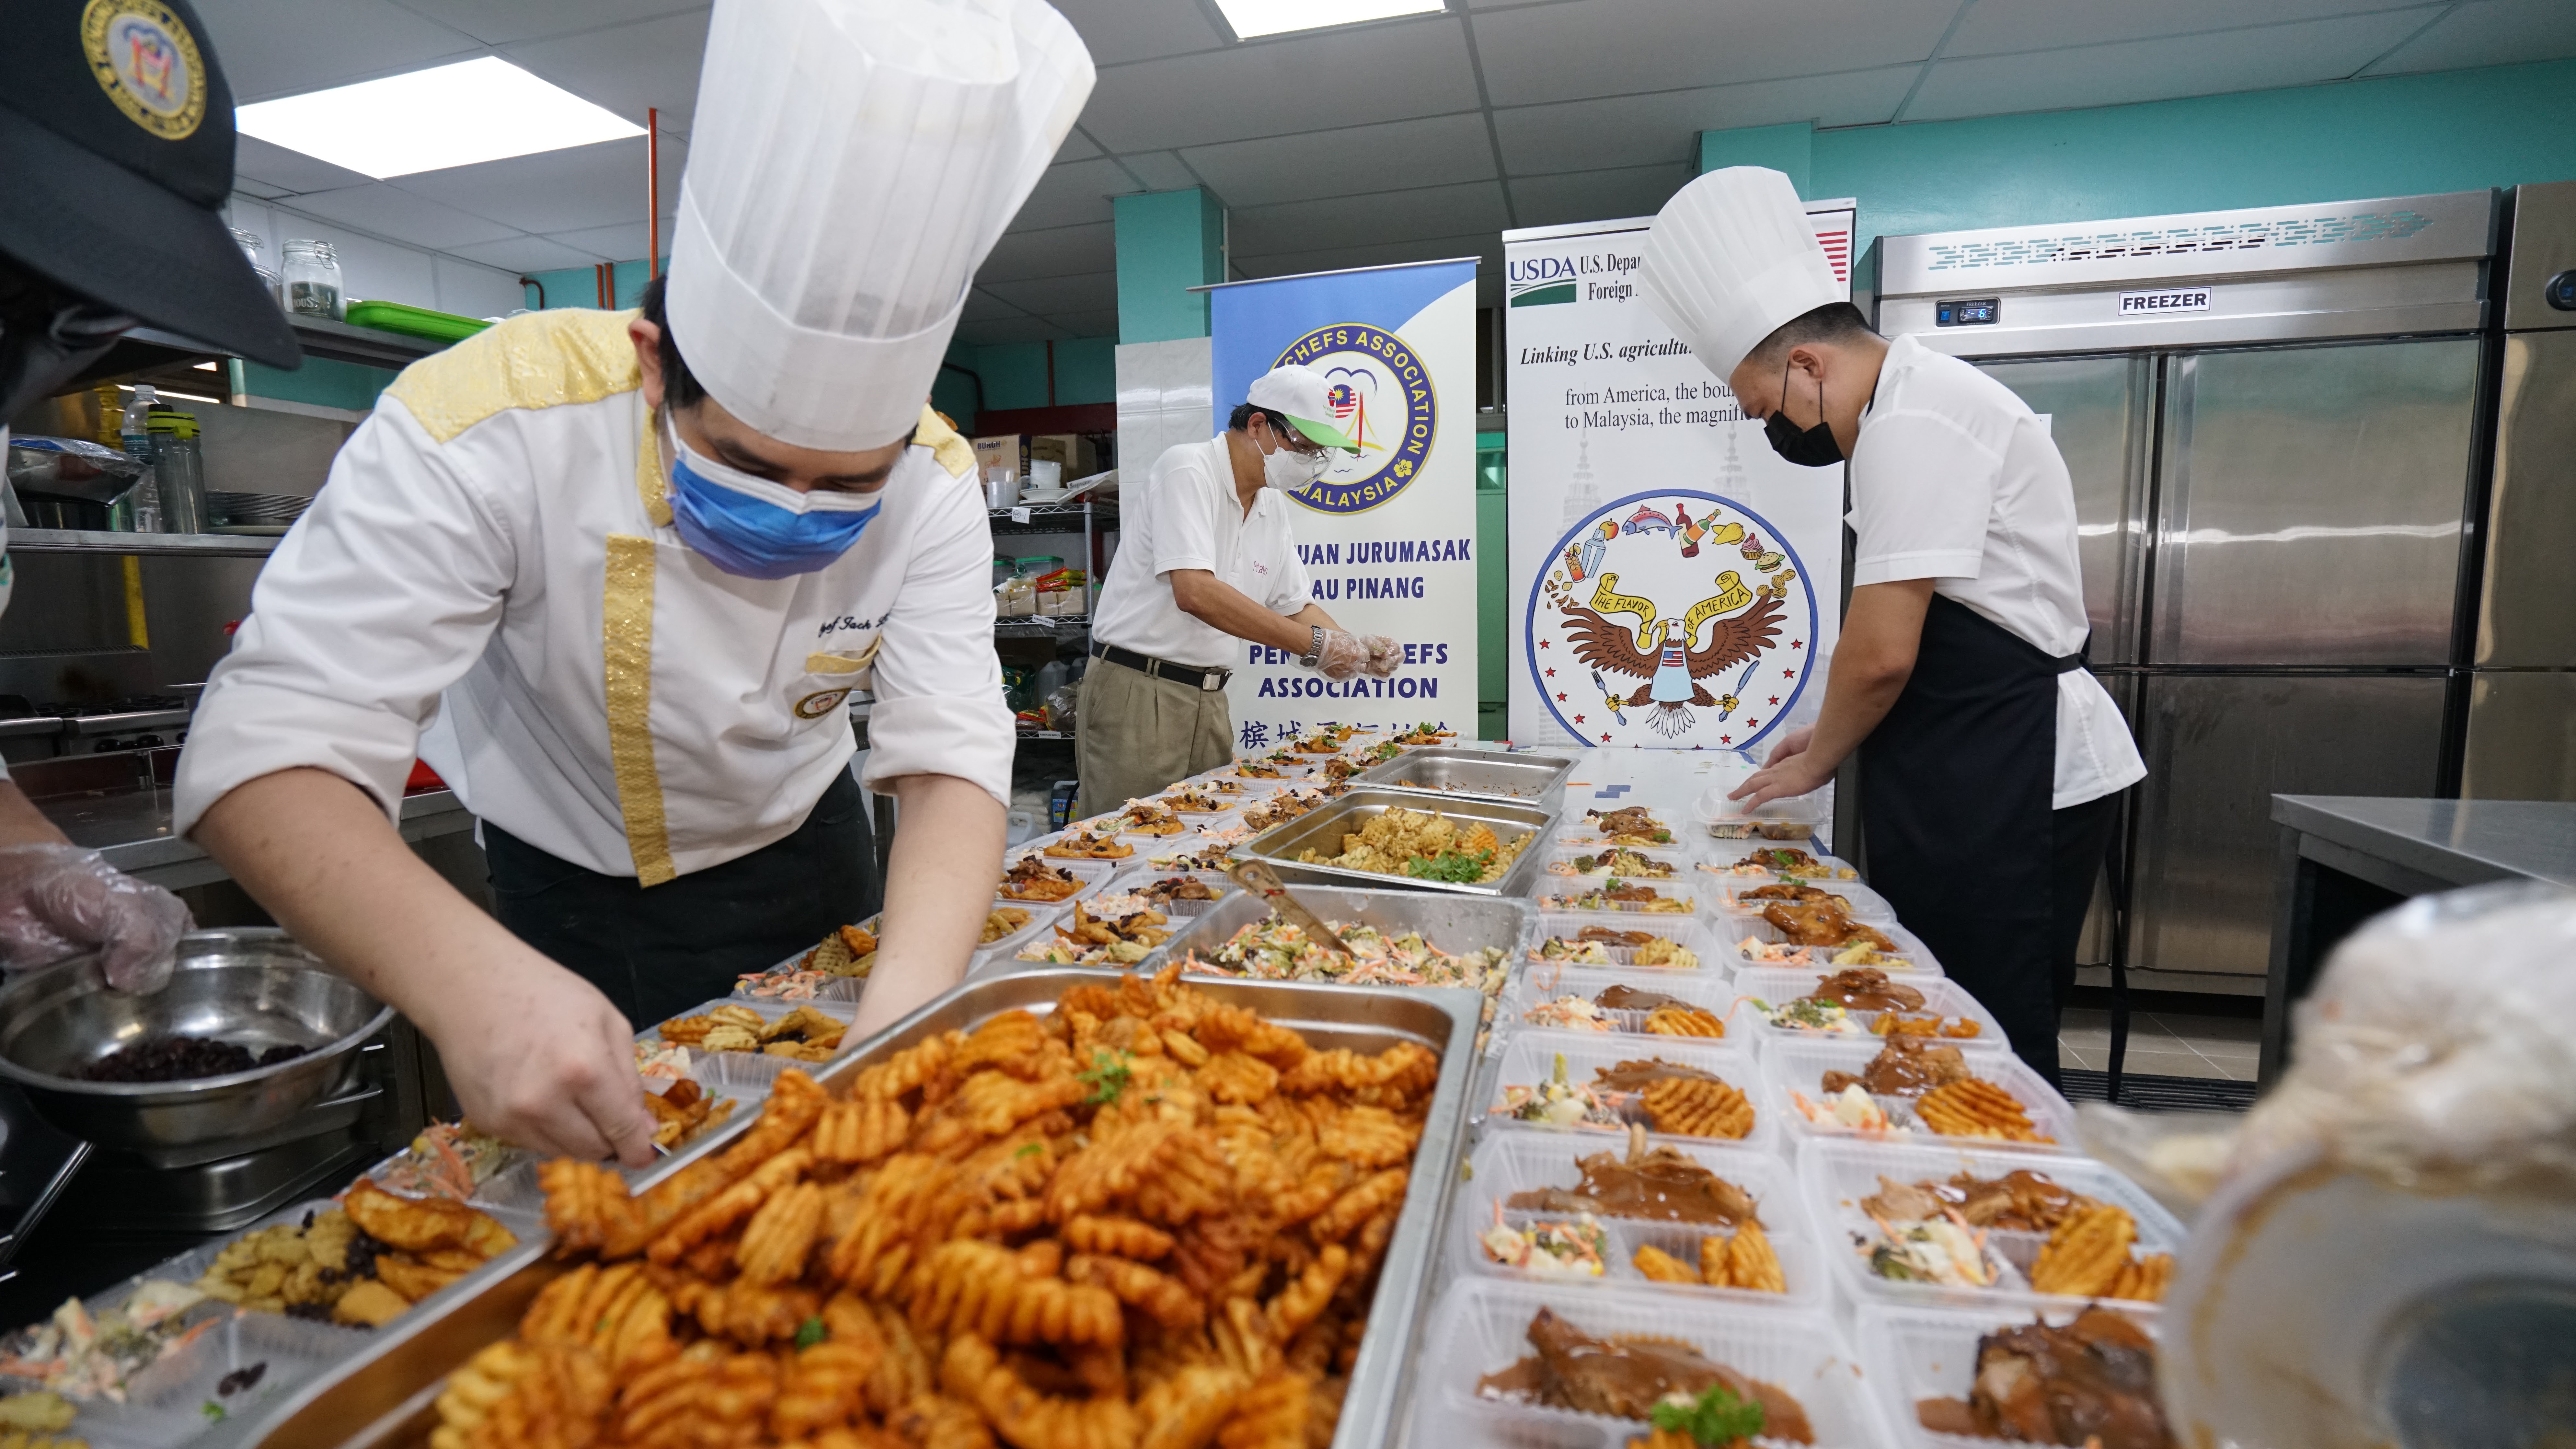 U.S. Potatoes Brings Nutritional Goodness to Penang’s Medical Frontliners on International Chef’s Day